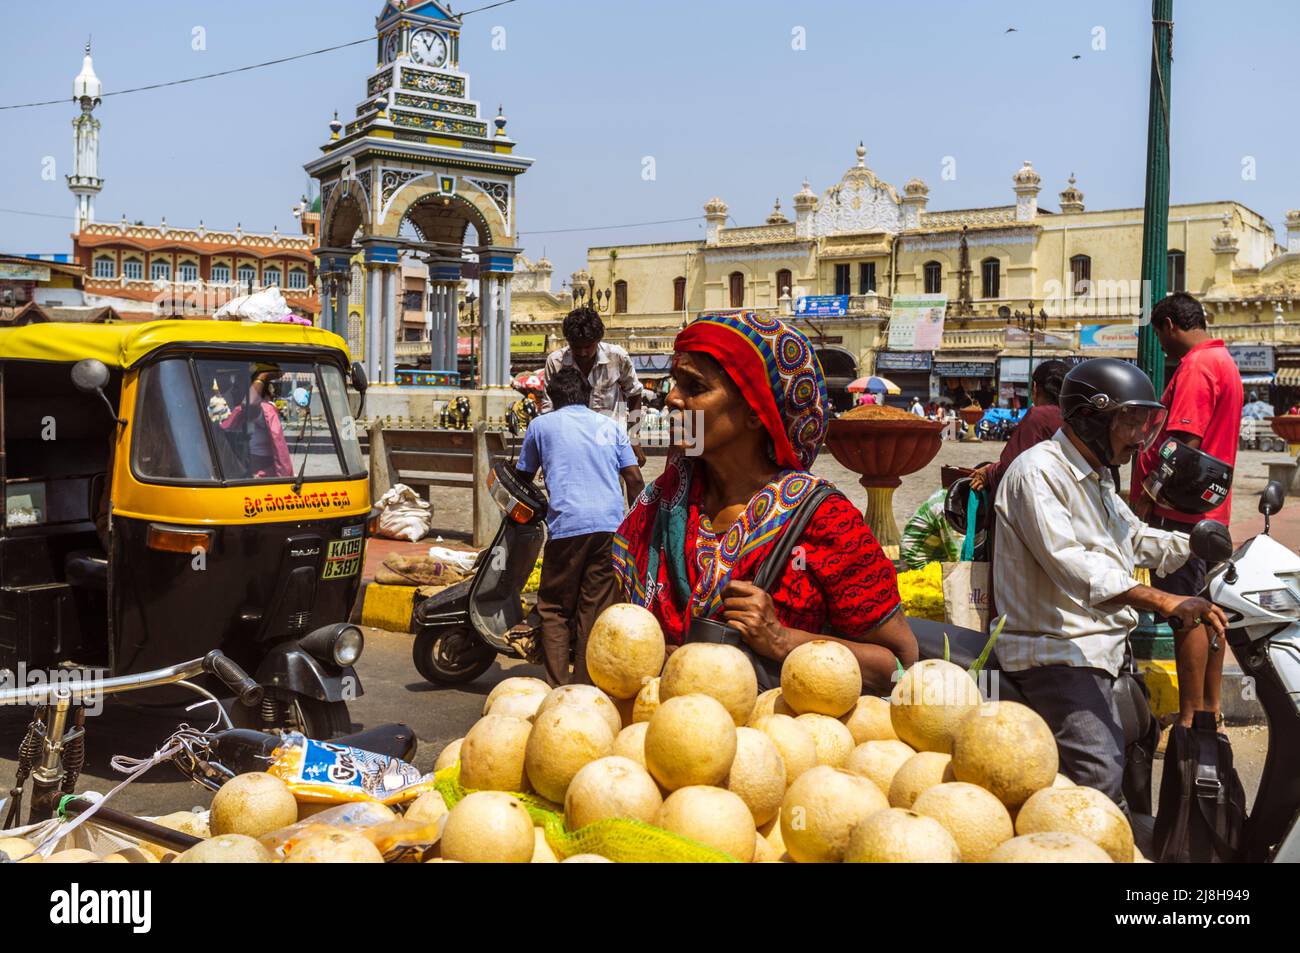 Mysore, Karnataka, India : A woman shops for fruit at a stall next to the Dufferin Clock Tower outside Devaraja market. Stock Photo